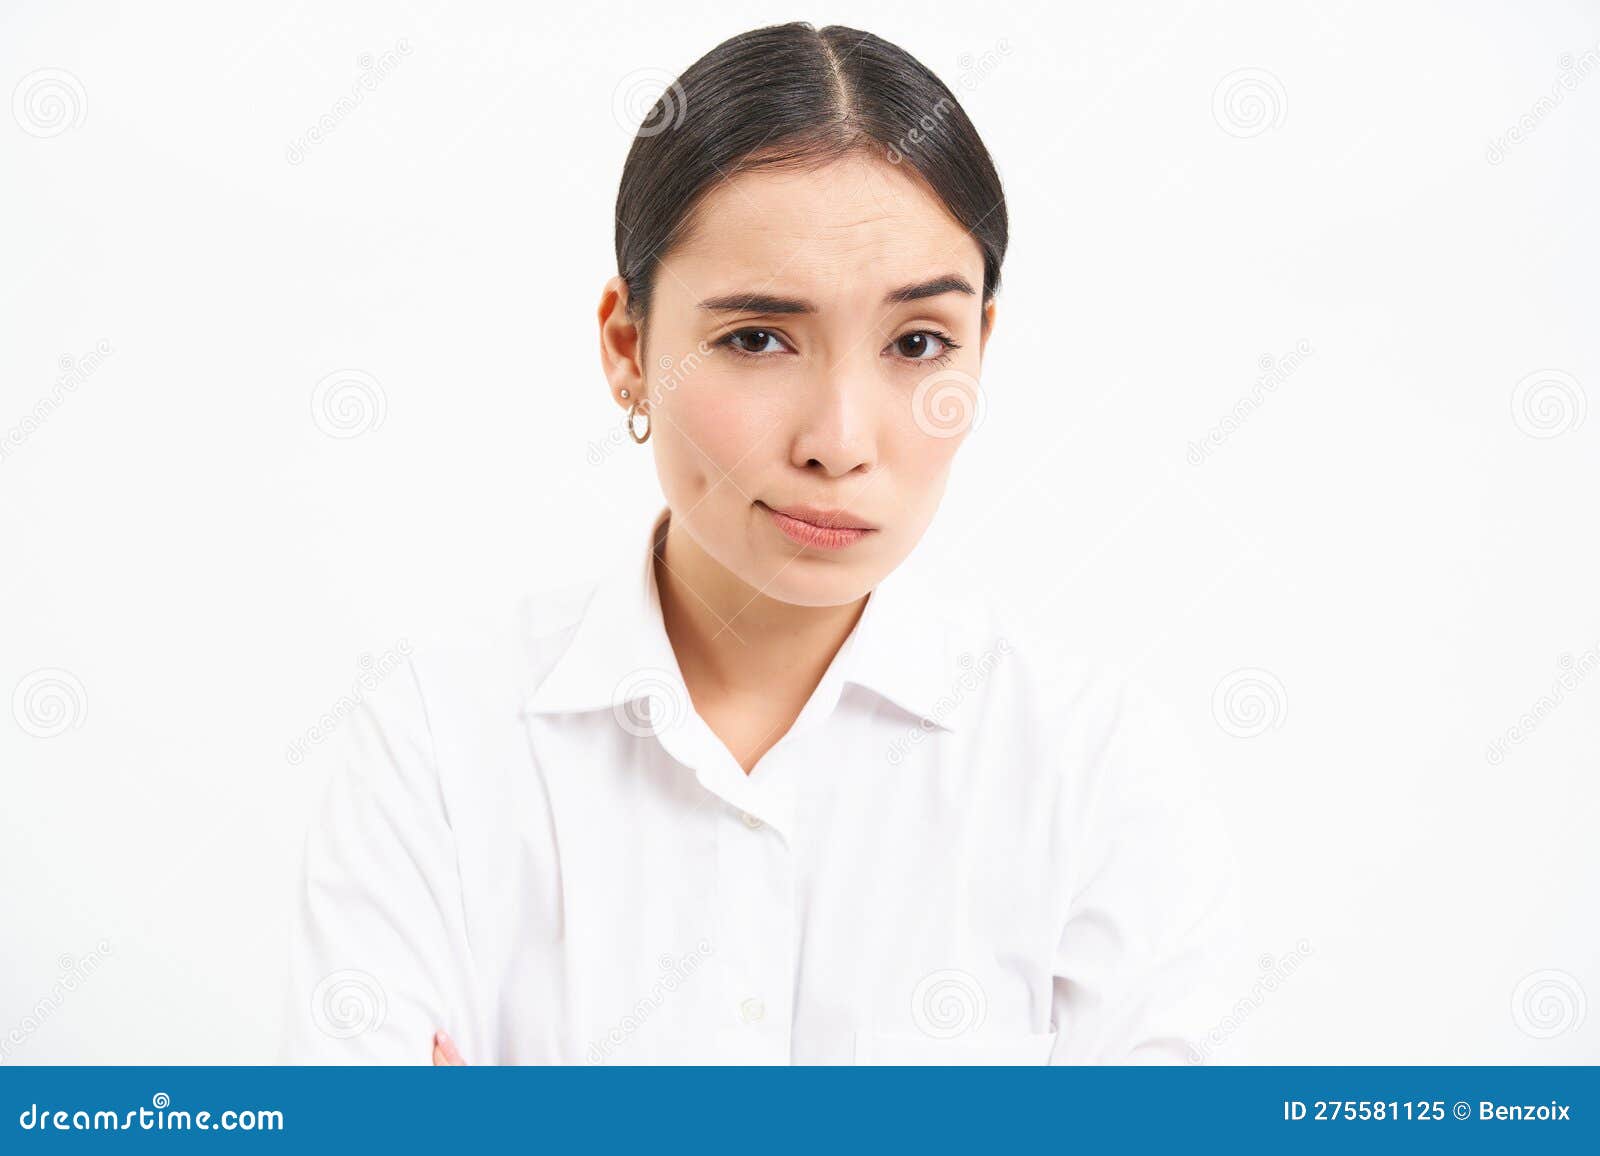 https://thumbs.dreamstime.com/z/asian-woman-professional-looks-skeptical-disbelief-face-unsure-smth-stands-isolated-white-background-275581125.jpg